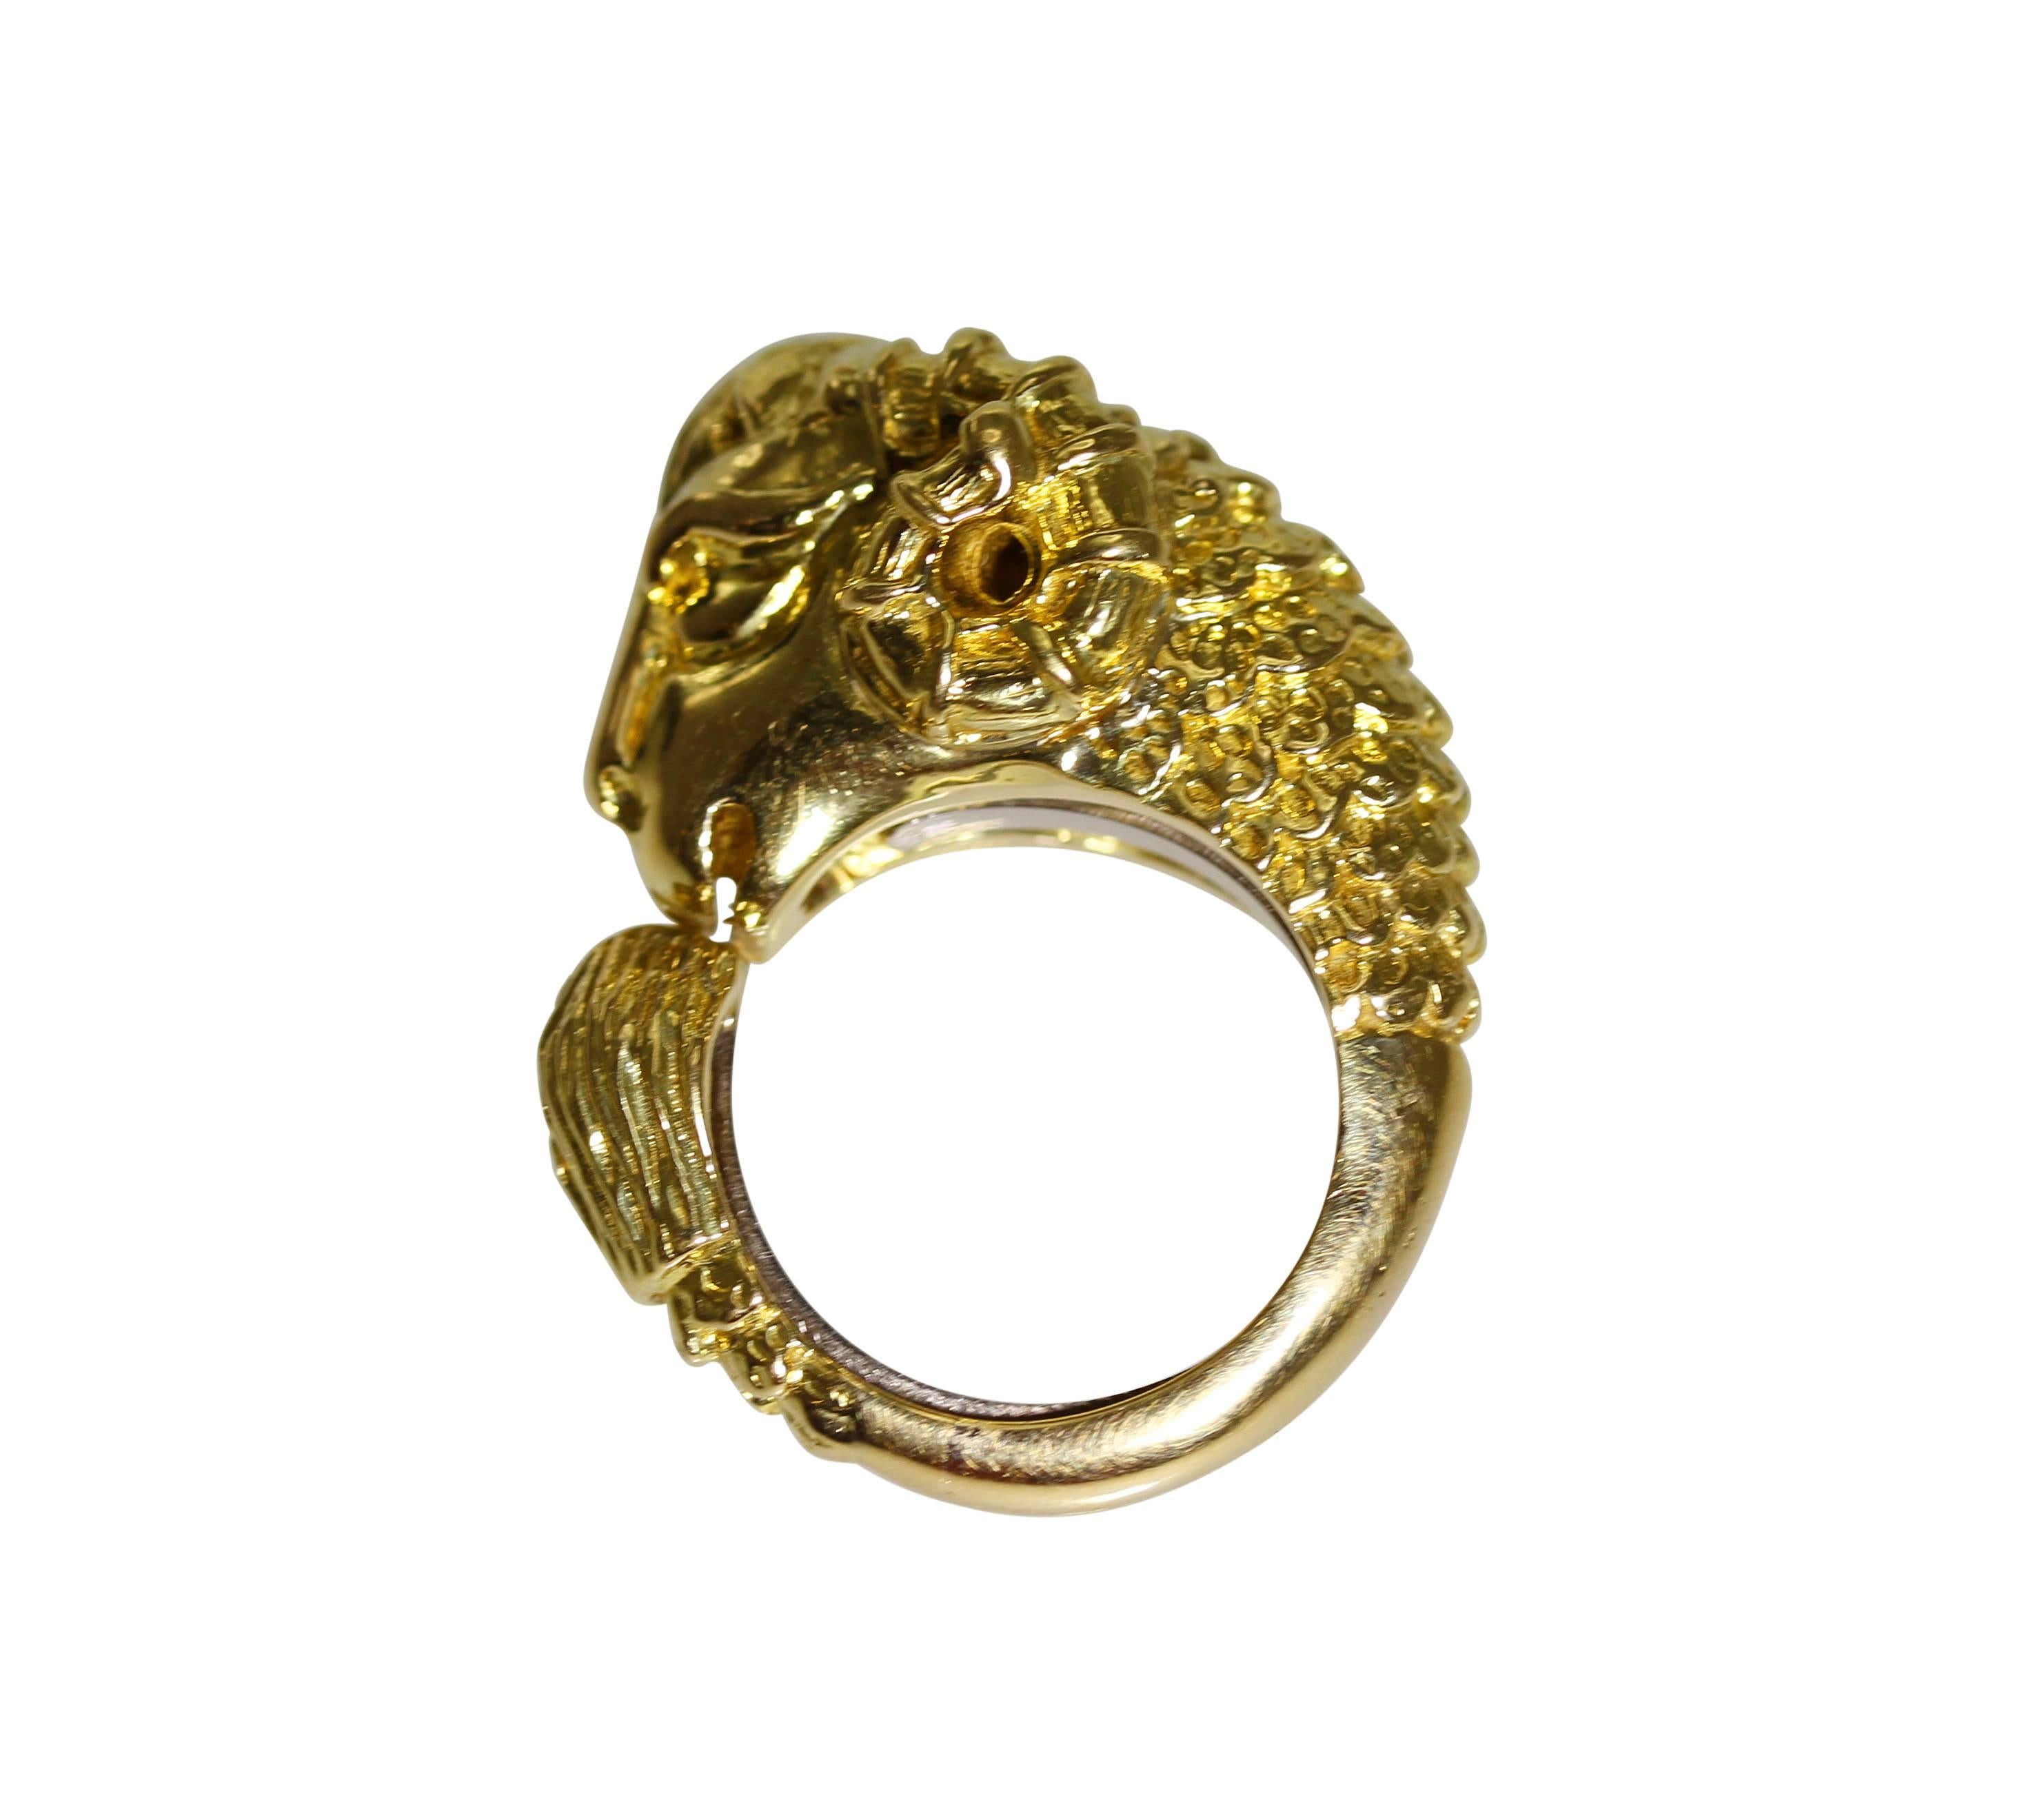 An 18 karat yellow gold ram's head ring by David Webb, designed as a ram's head with body wrapping around completed by a tail, gross weight 27.0 grams, size 6, measuring 1 1/4 by 1 by 1/2 inches.